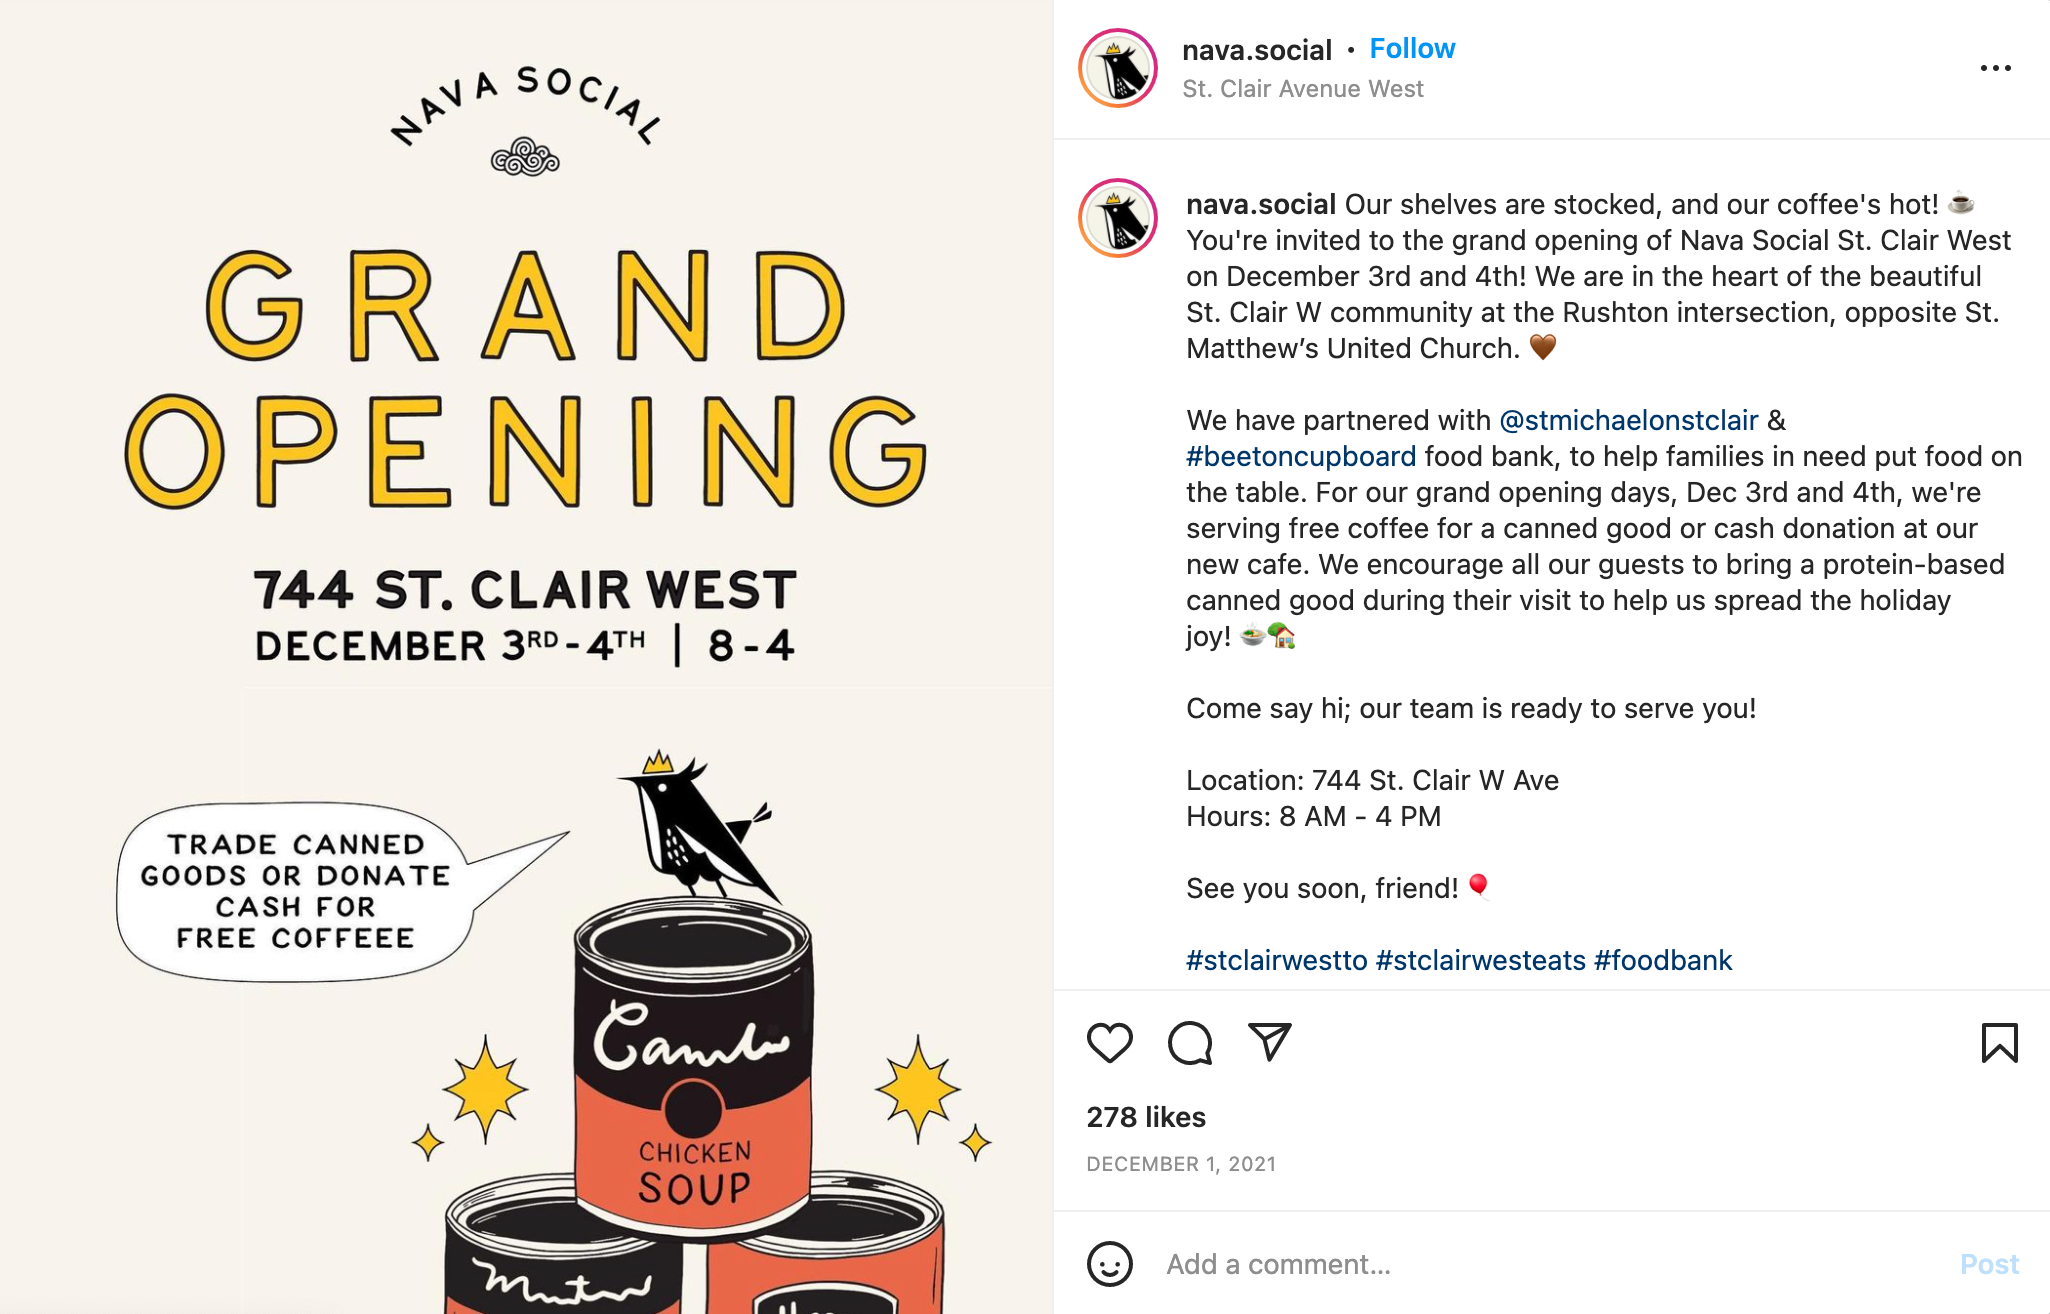 Instagram post advertising Nava Social's grand opening with a charity partnership